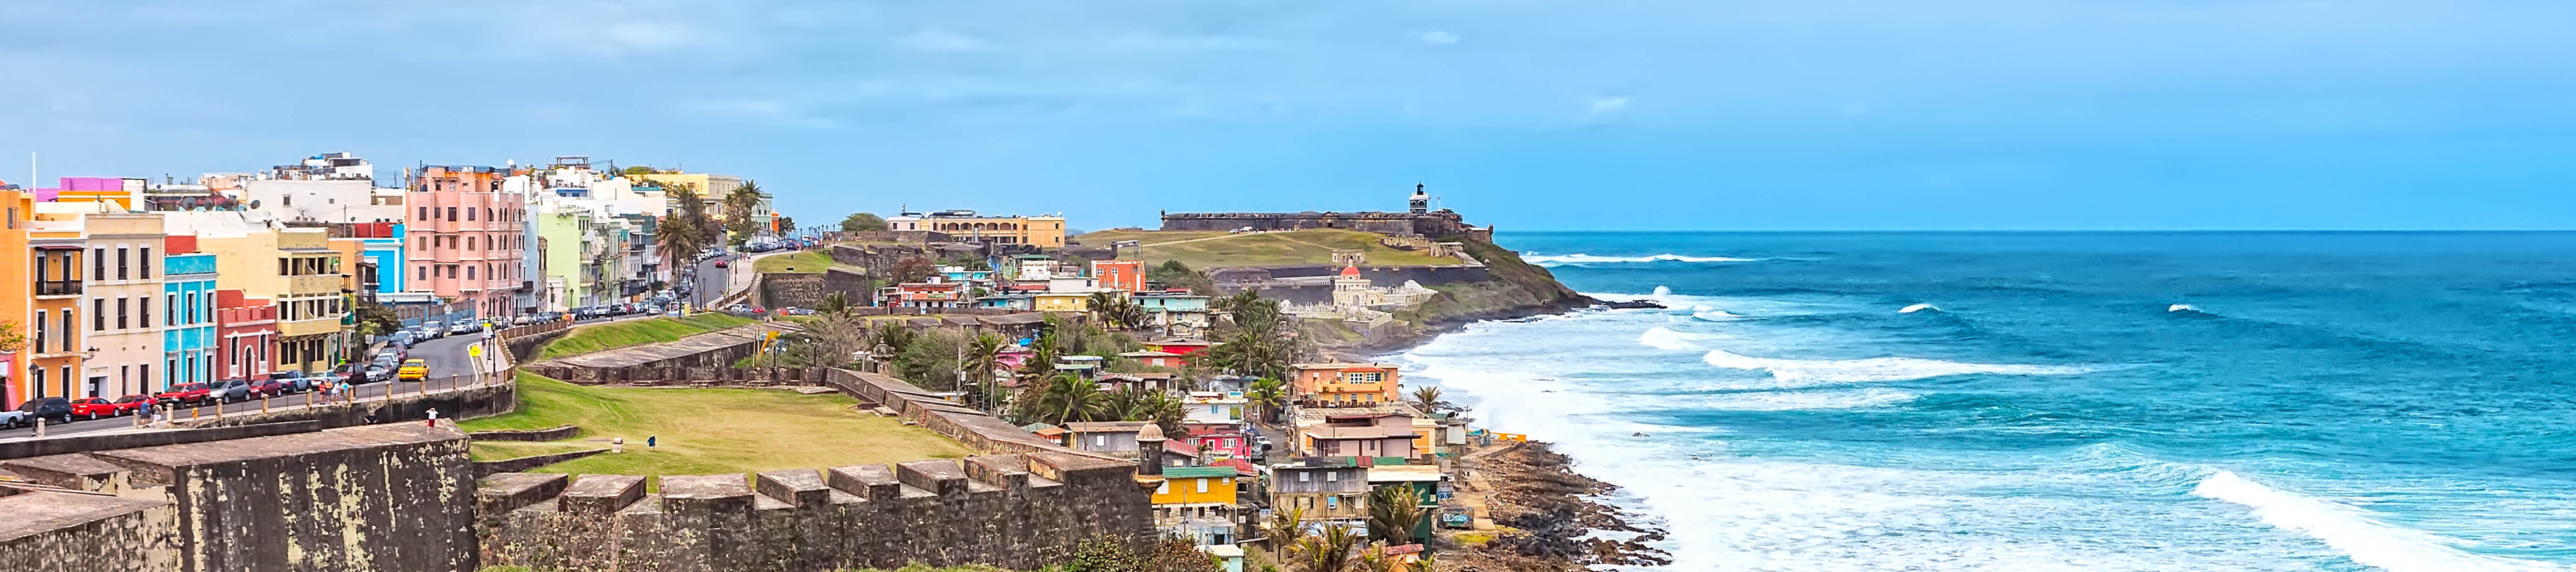 image of puerto rico on our chiropractic continuing education online page